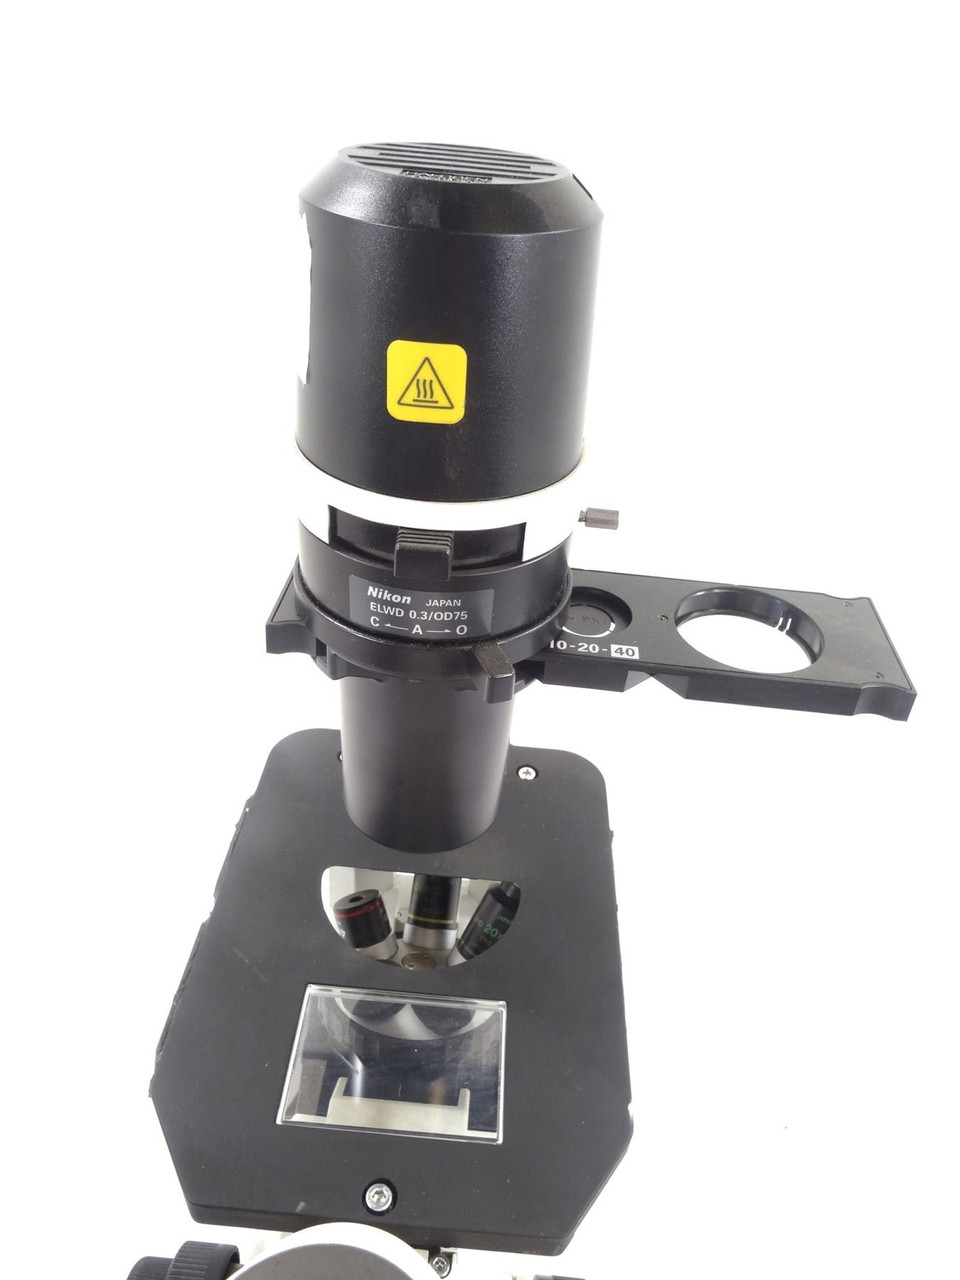 Nikon Eclipse Ts100 Inverted Phase Contrast Microscope Free Shipping